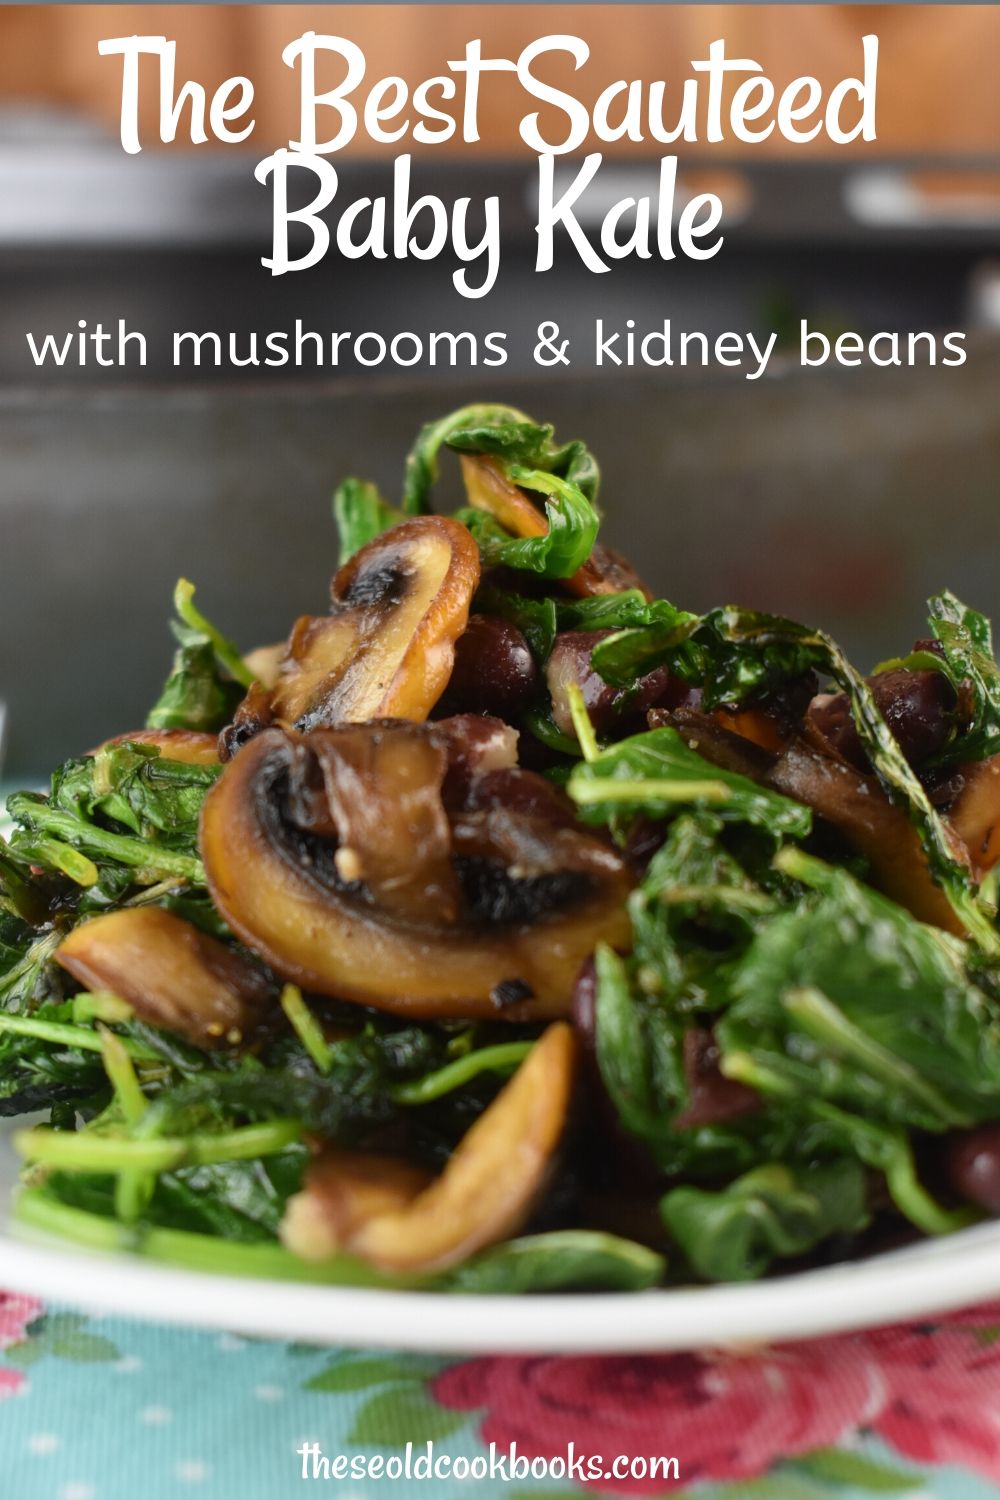 Sauteed Baby Kale and Mushrooms is packed with flavor and nutritious ingredients. Mushrooms sauteed in olive oil perfectly compliment wilted baby kale with a surprise addition of kidney beans for added protein. Serve this along side grilled chicken or make it meatless by eating it over a cooked sweet potato or quinoa. 